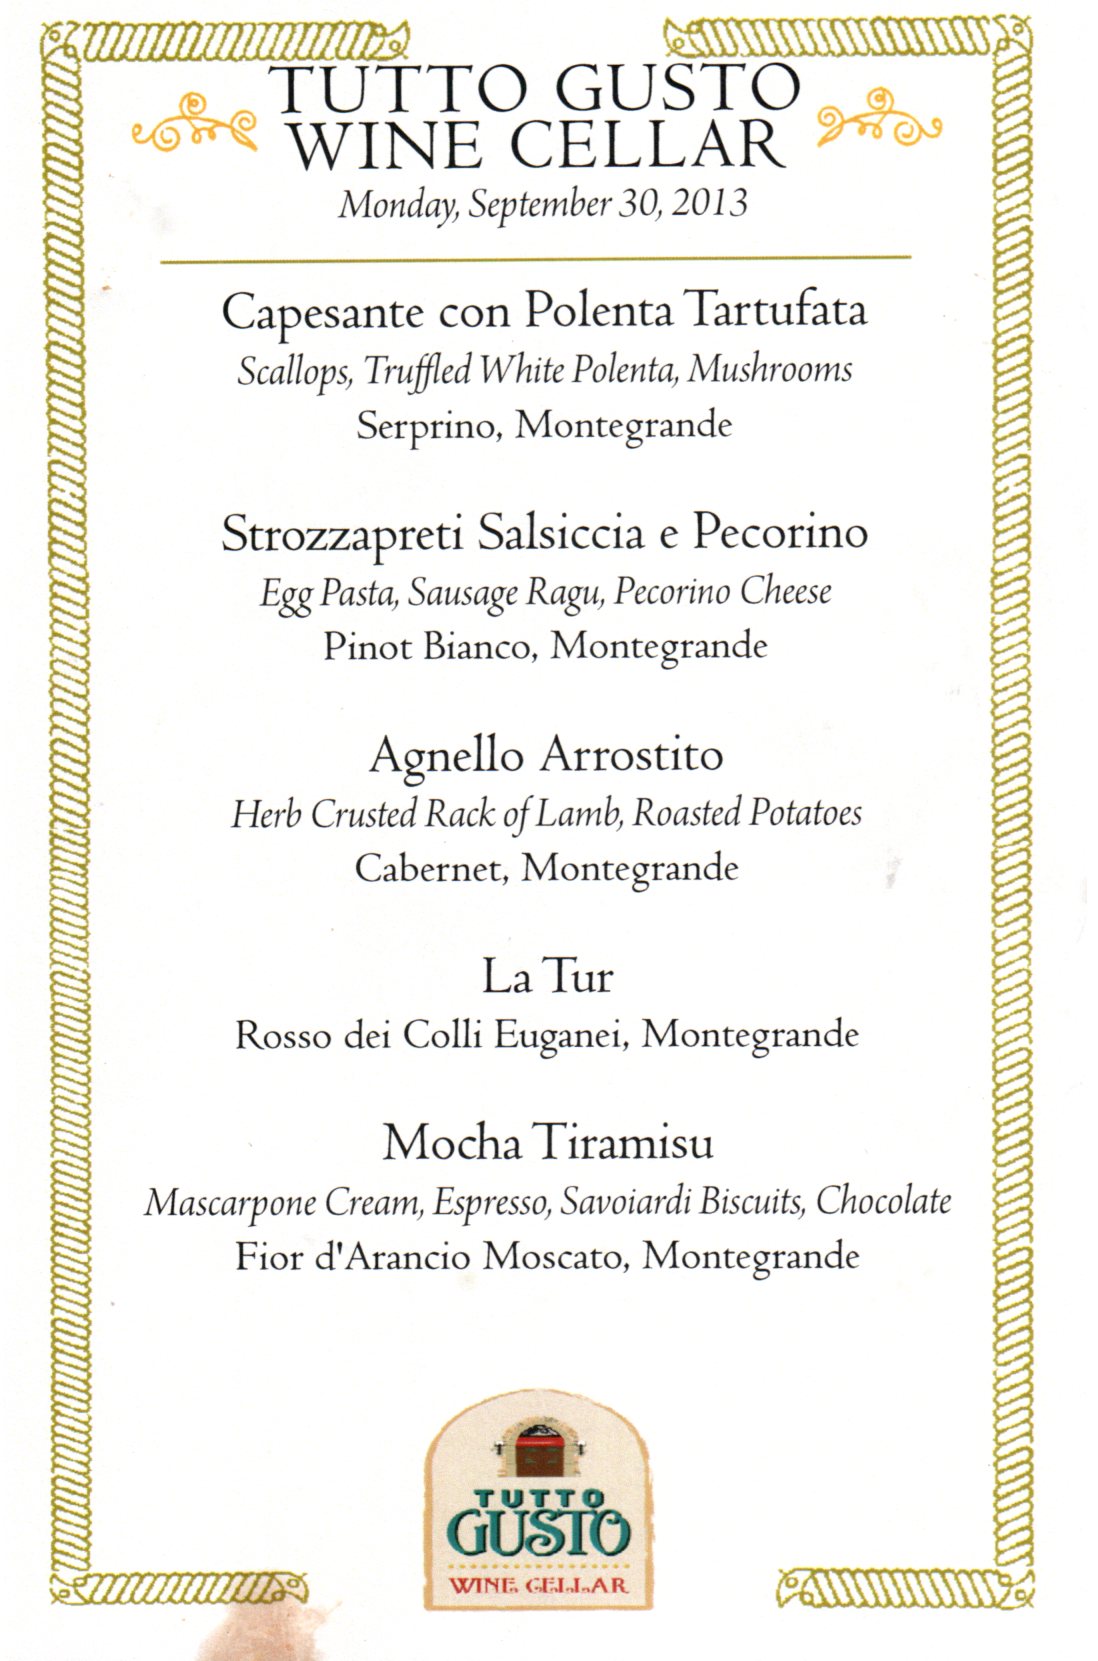 Menu (I don't expect it to change throughout the Food & Wine Festival)